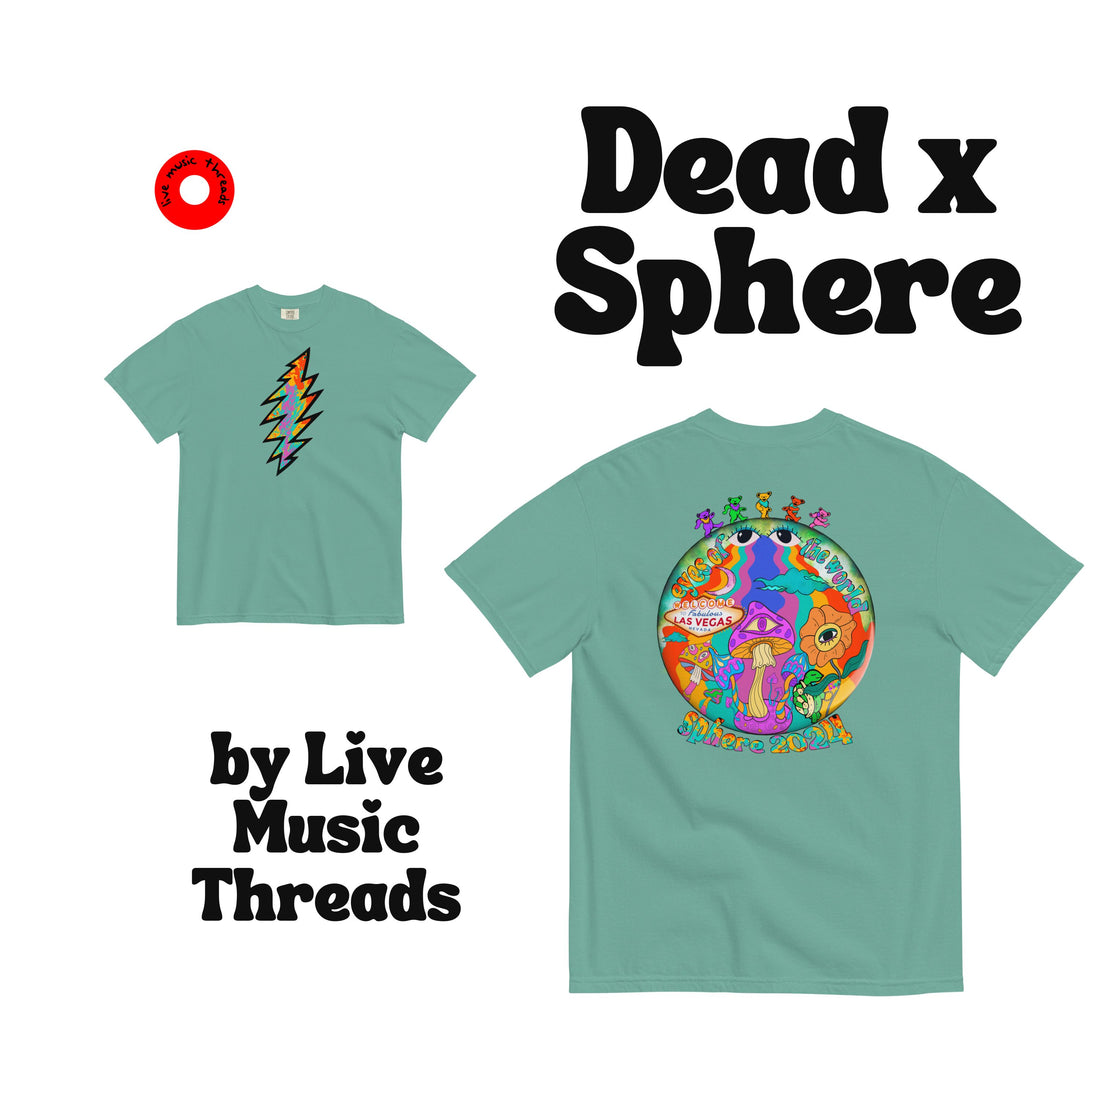 Sphere x Dead & Company - behind the design